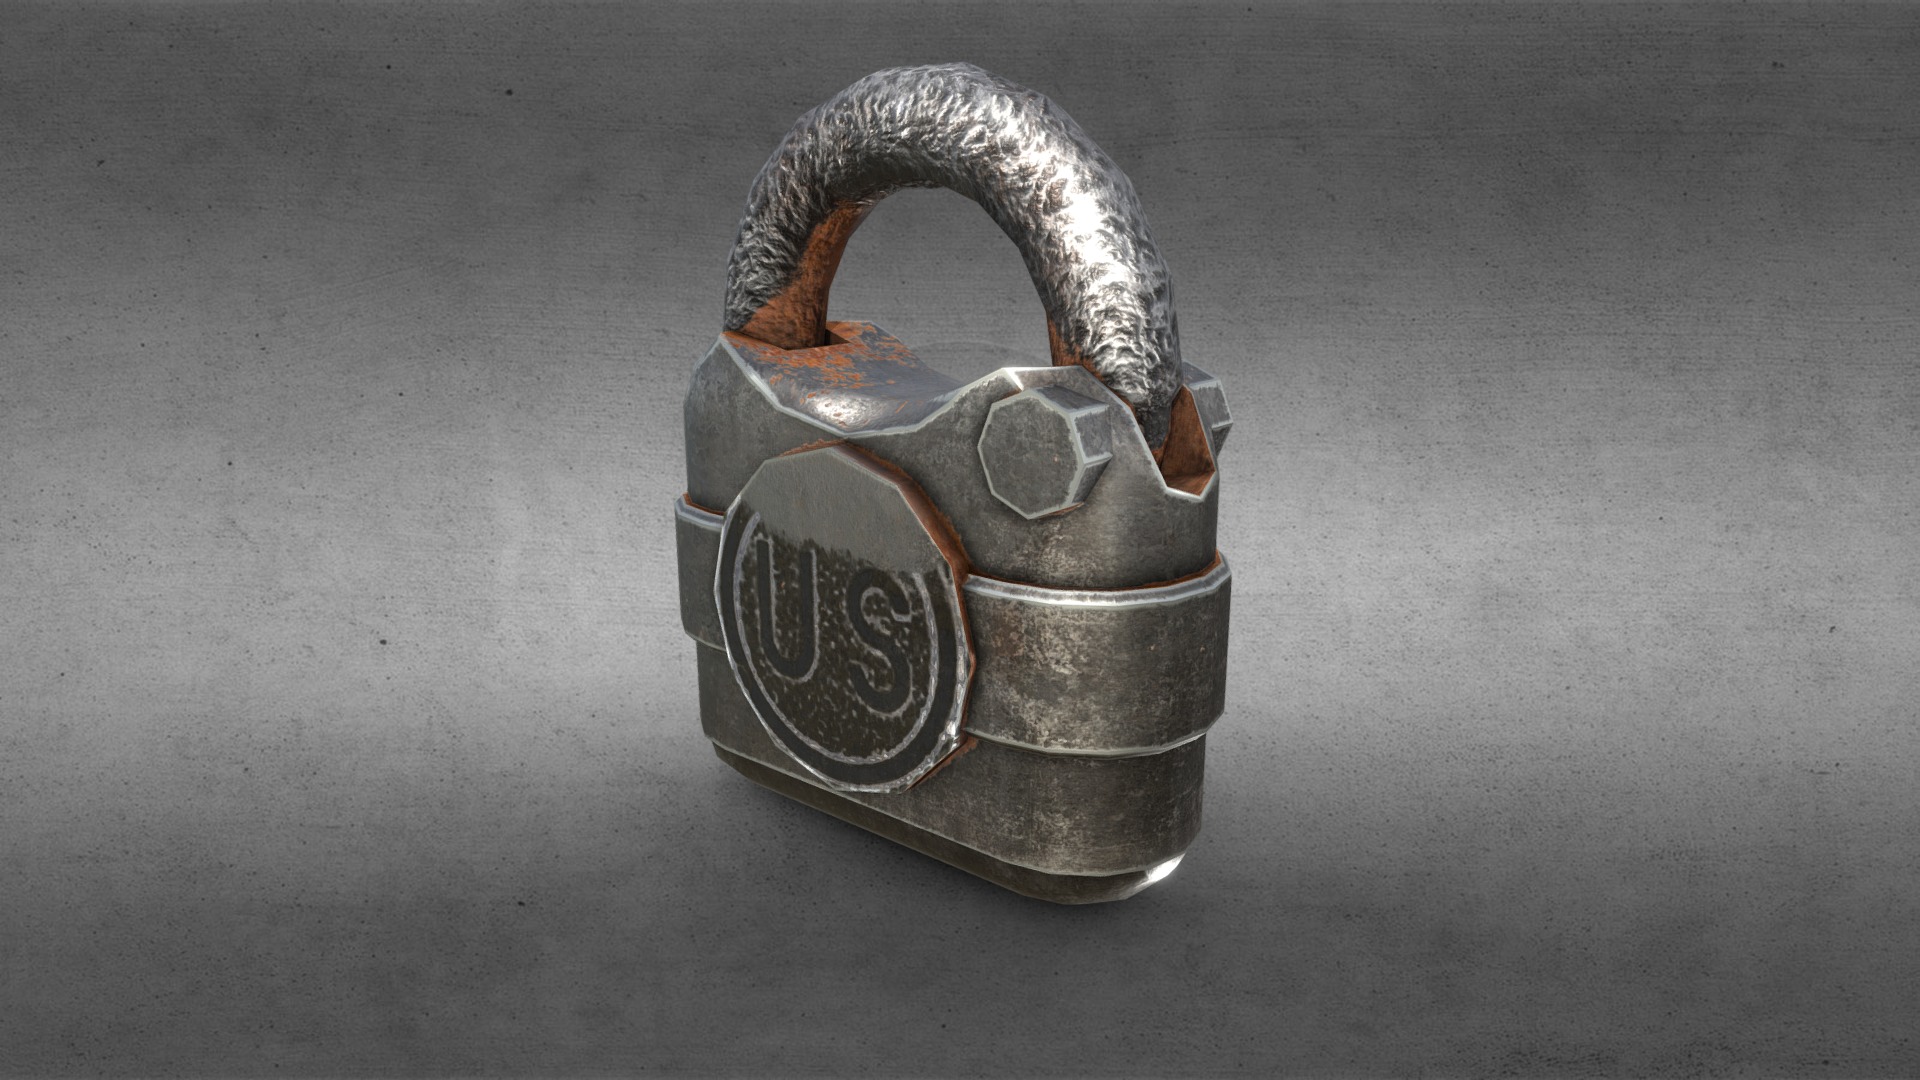 3D model W. H. Taylor Padlock - This is a 3D model of the W. H. Taylor Padlock. The 3D model is about a metal can with a handle.